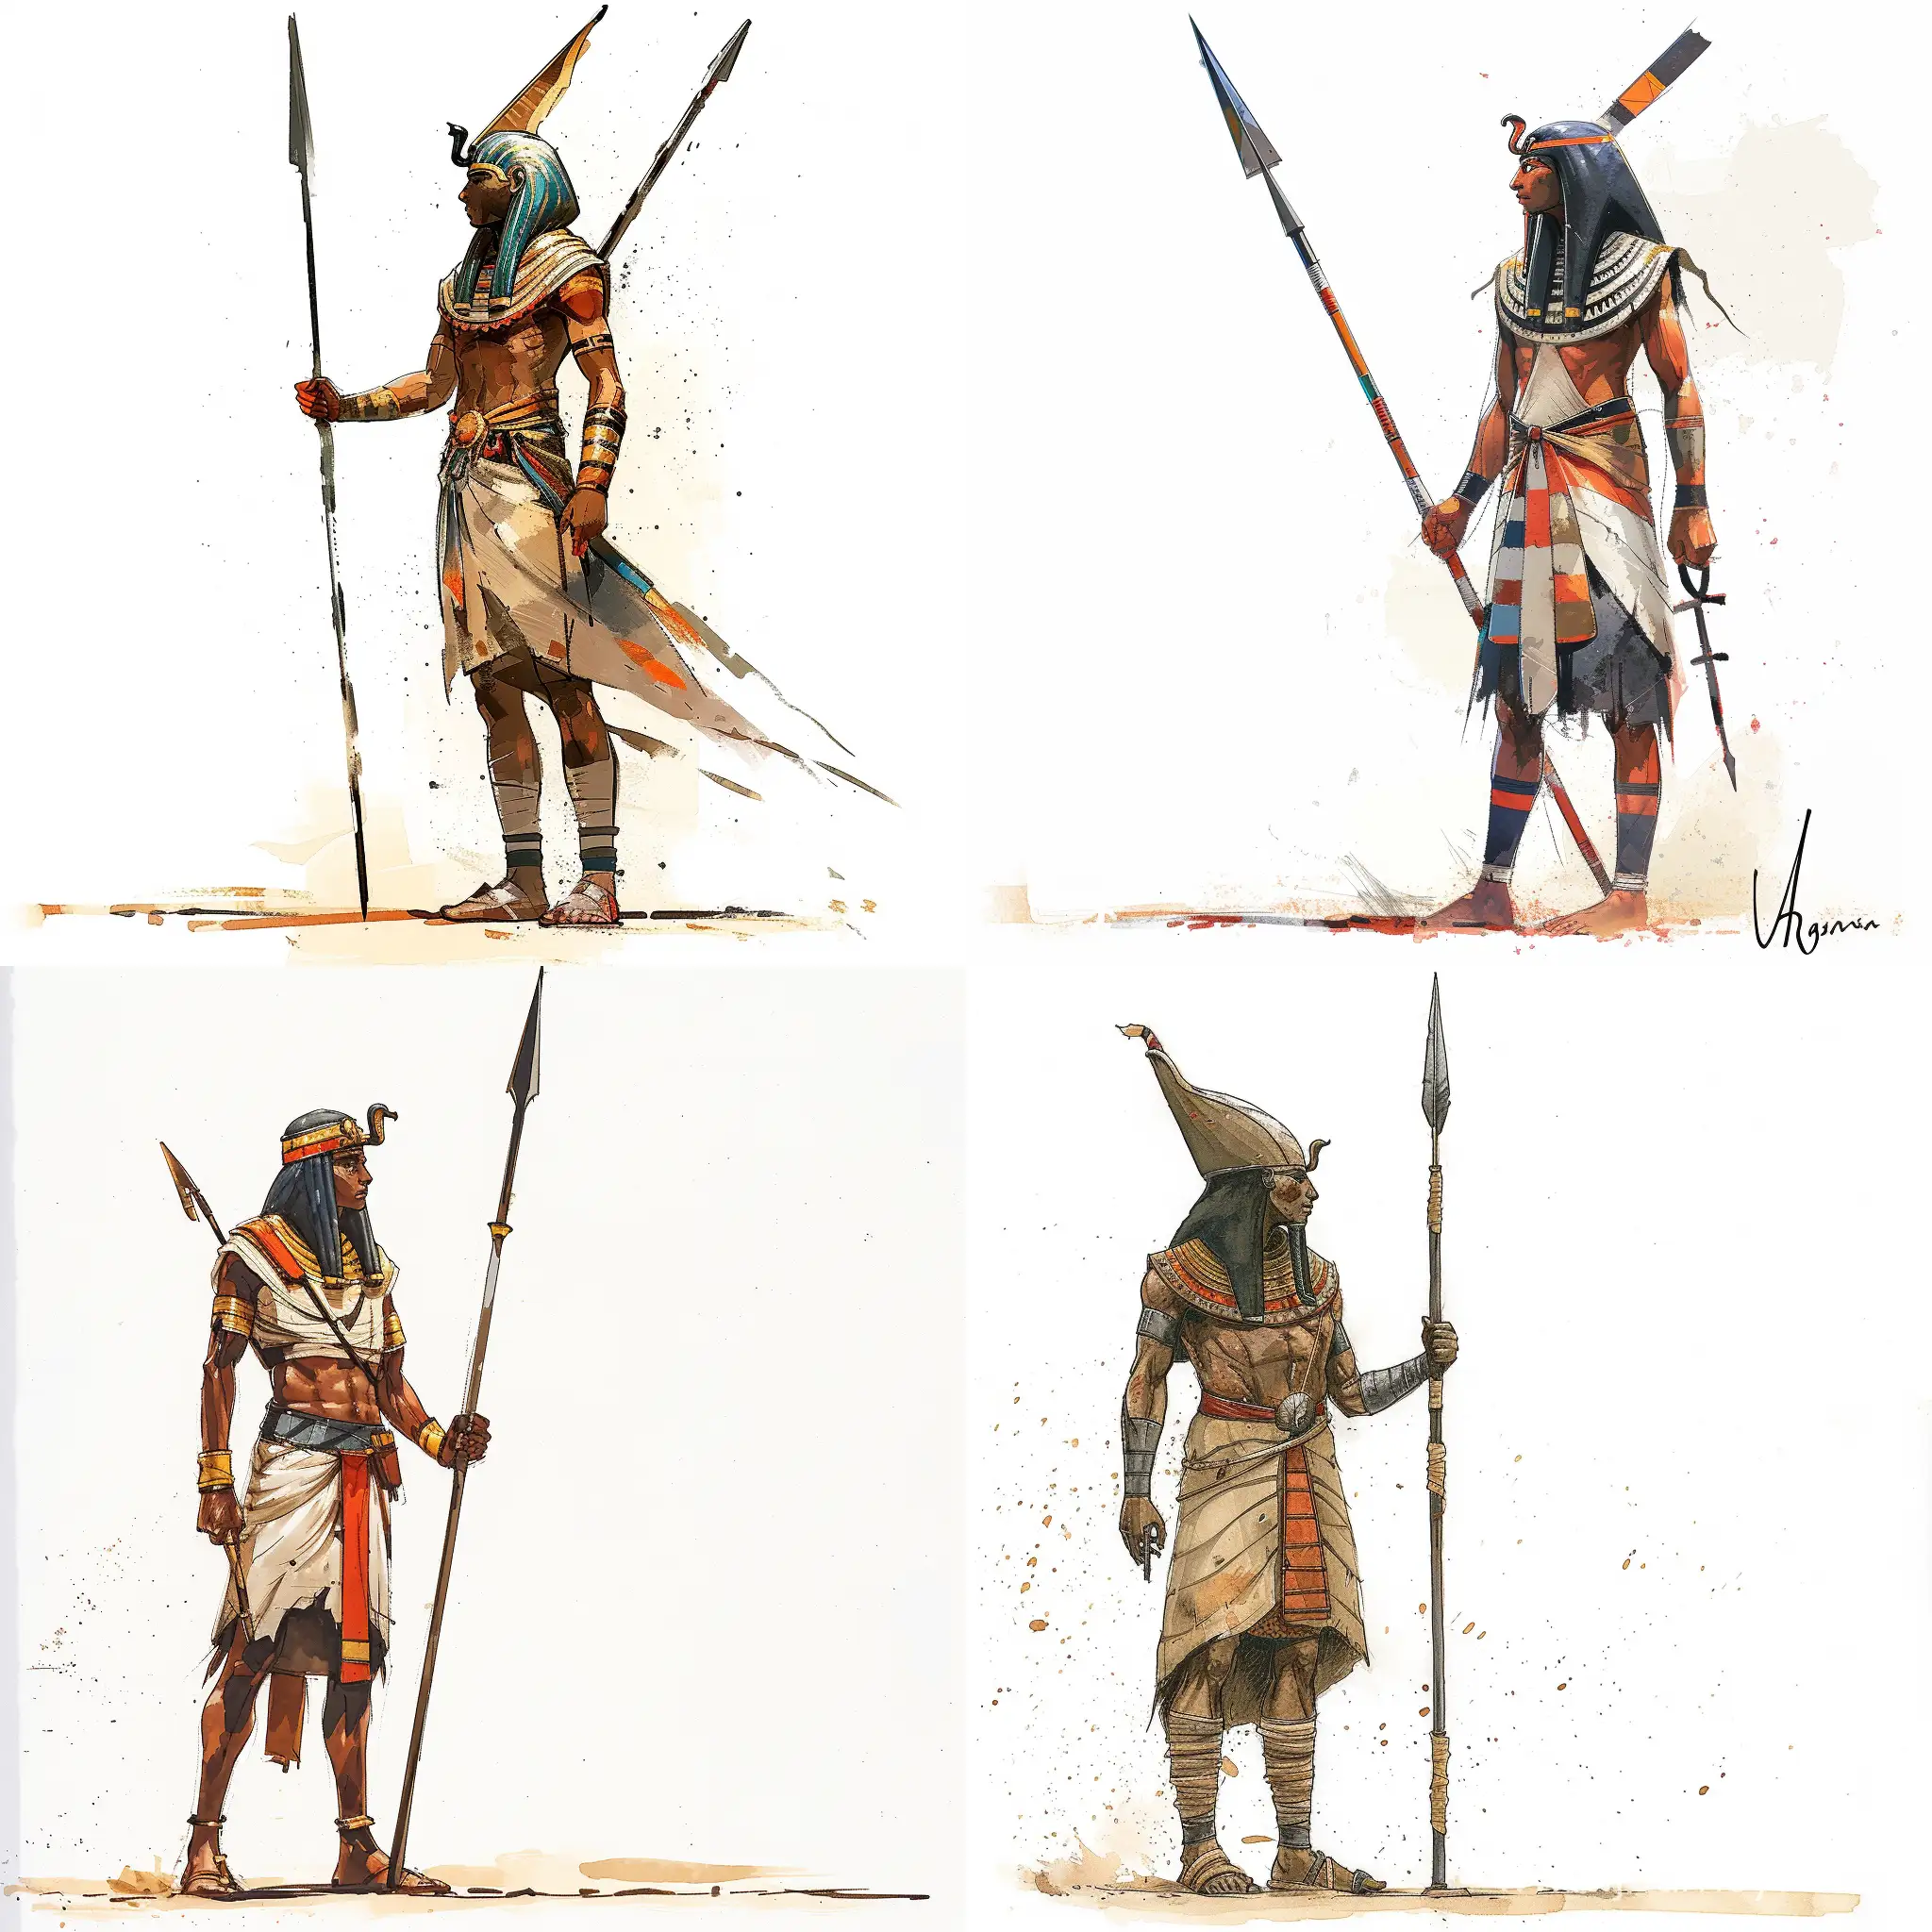 Stylized-Ancient-Egyptian-Warrior-in-Combat-Gear-with-Spear